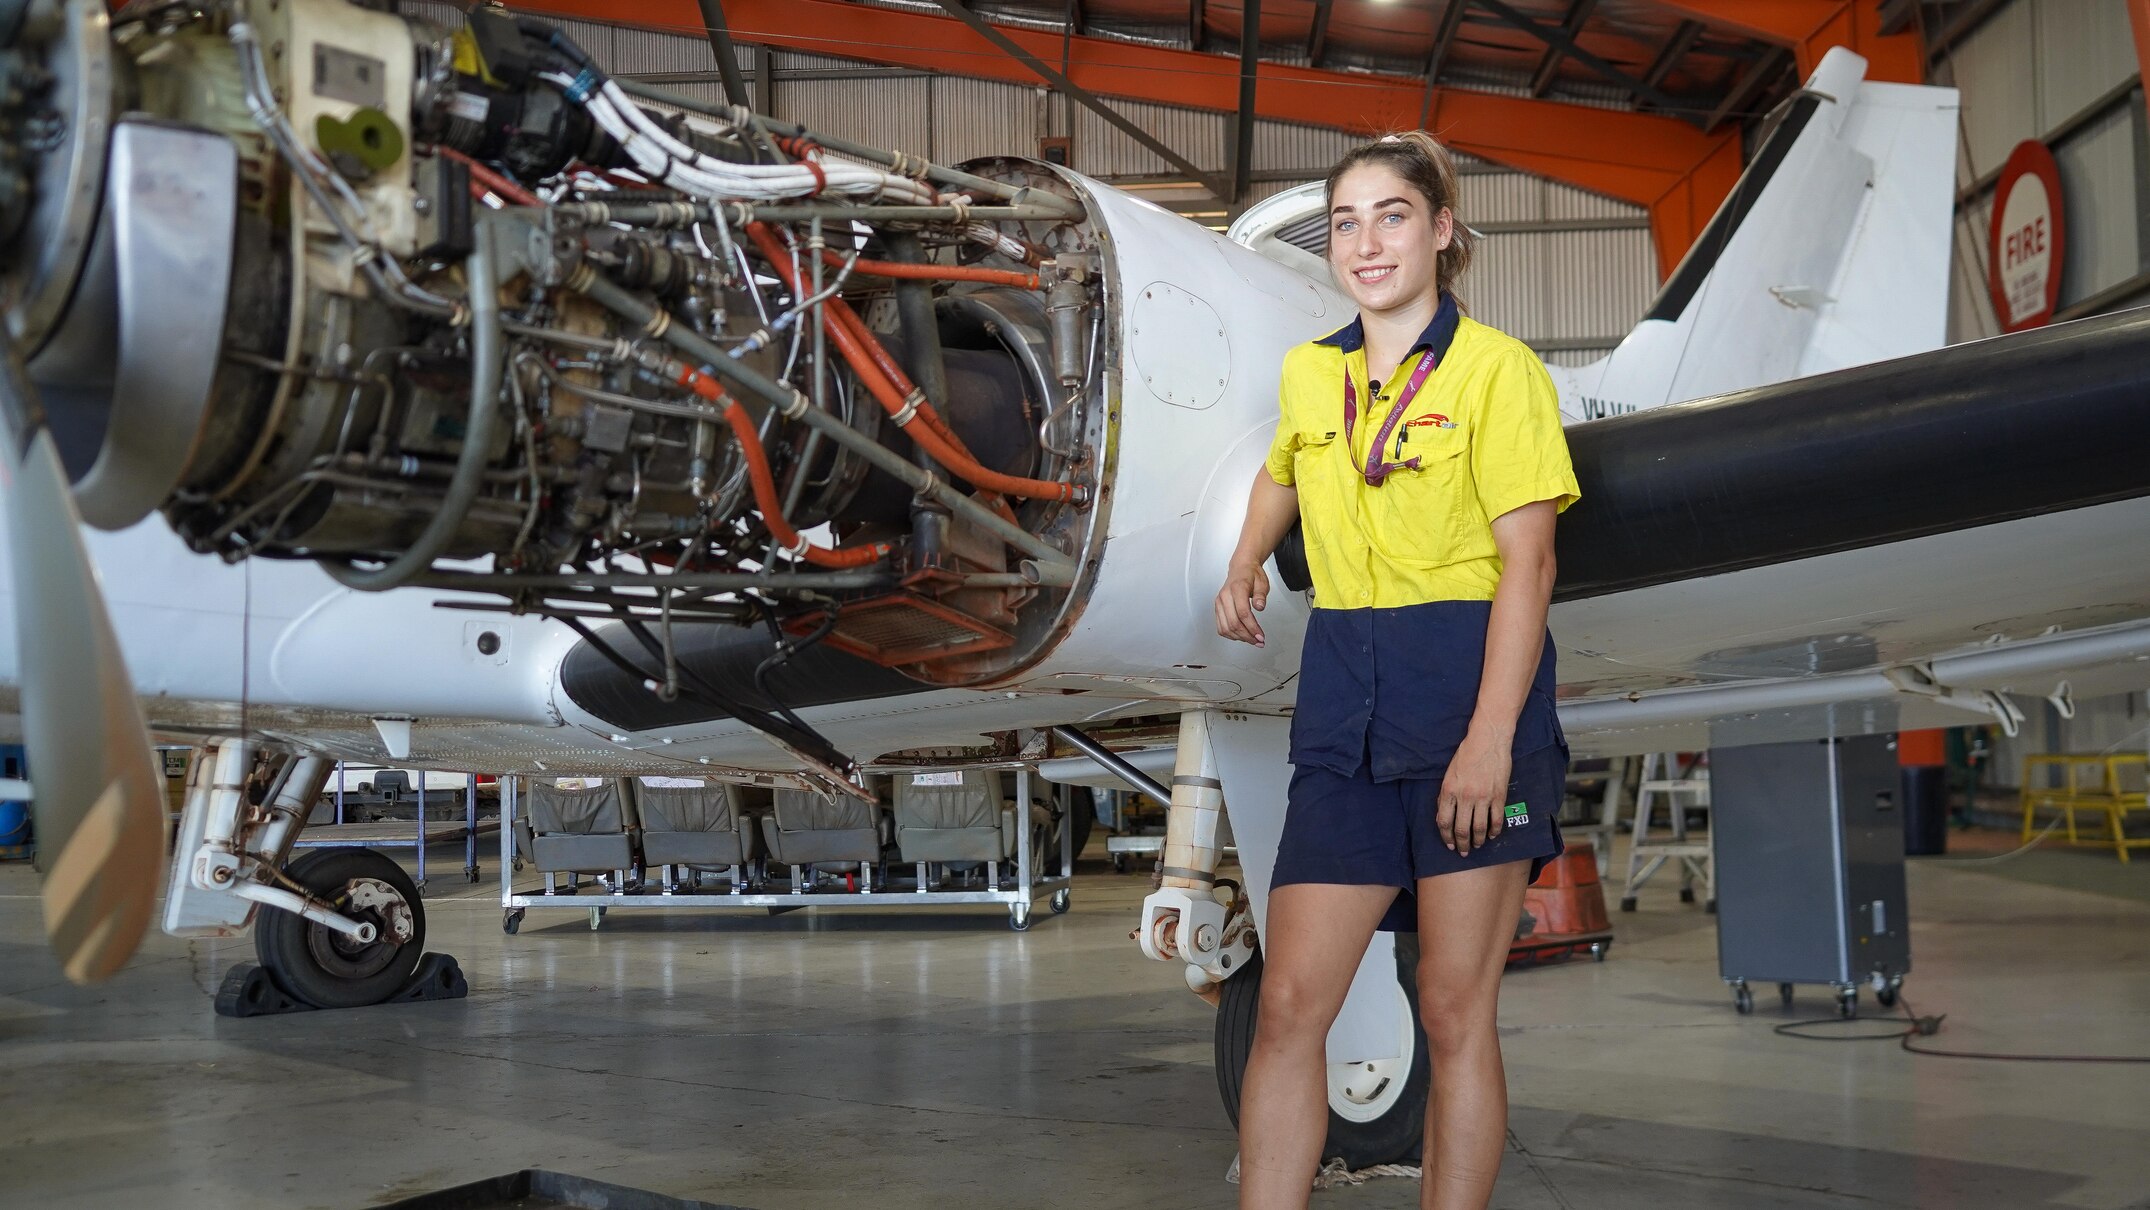 trades shortage prompts nt aviation company to recruit women to fill the gap